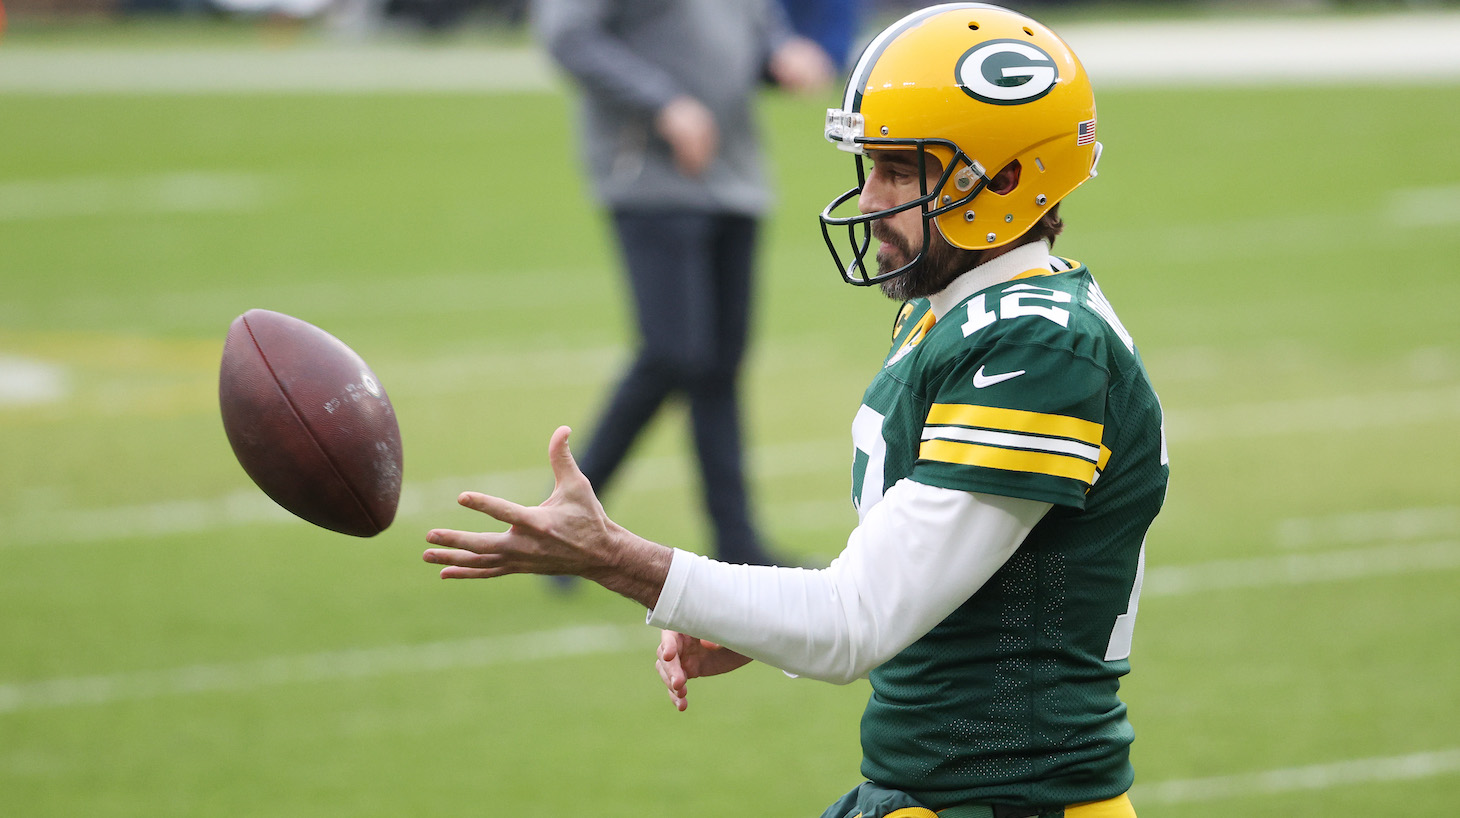 GREEN BAY, WISCONSIN - JANUARY 24: Aaron Rodgers #12 of the Green Bay Packers warms up prior to their NFC Championship game against the Tampa Bay Buccaneers at Lambeau Field on January 24, 2021 in Green Bay, Wisconsin. (Photo by Dylan Buell/Getty Images)